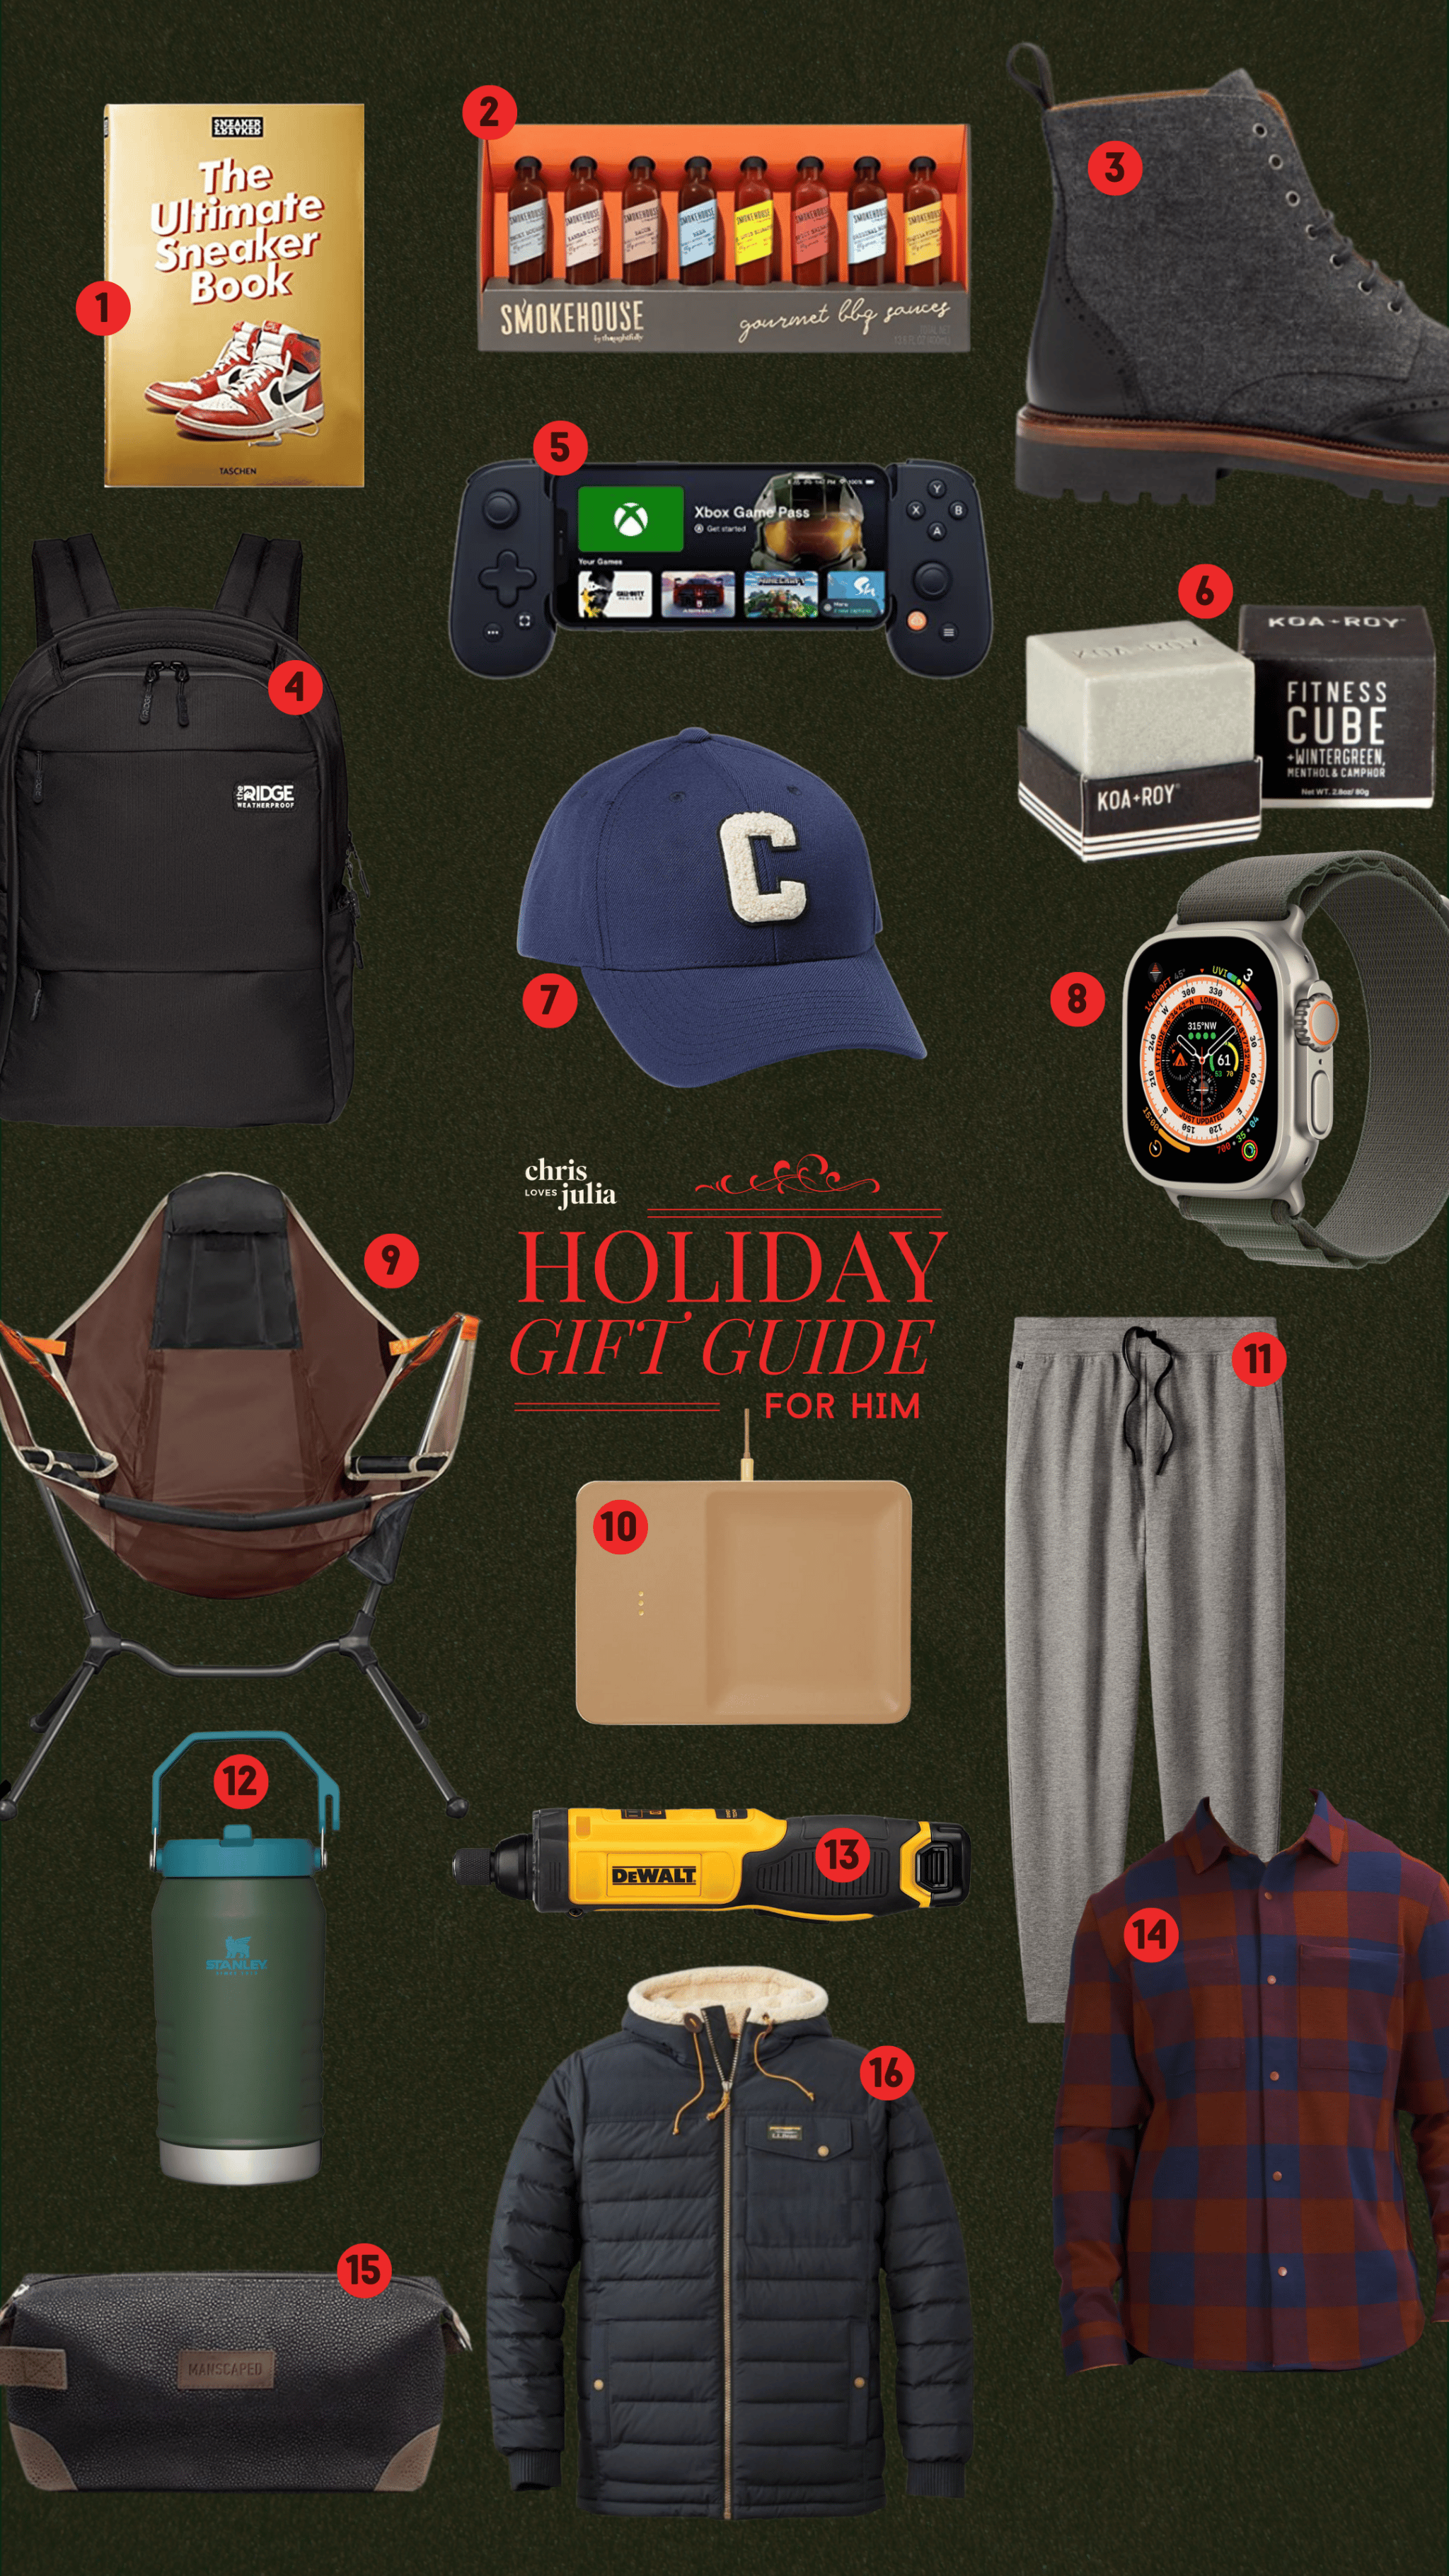 RCS Gift Guide #2: The WFH Guy